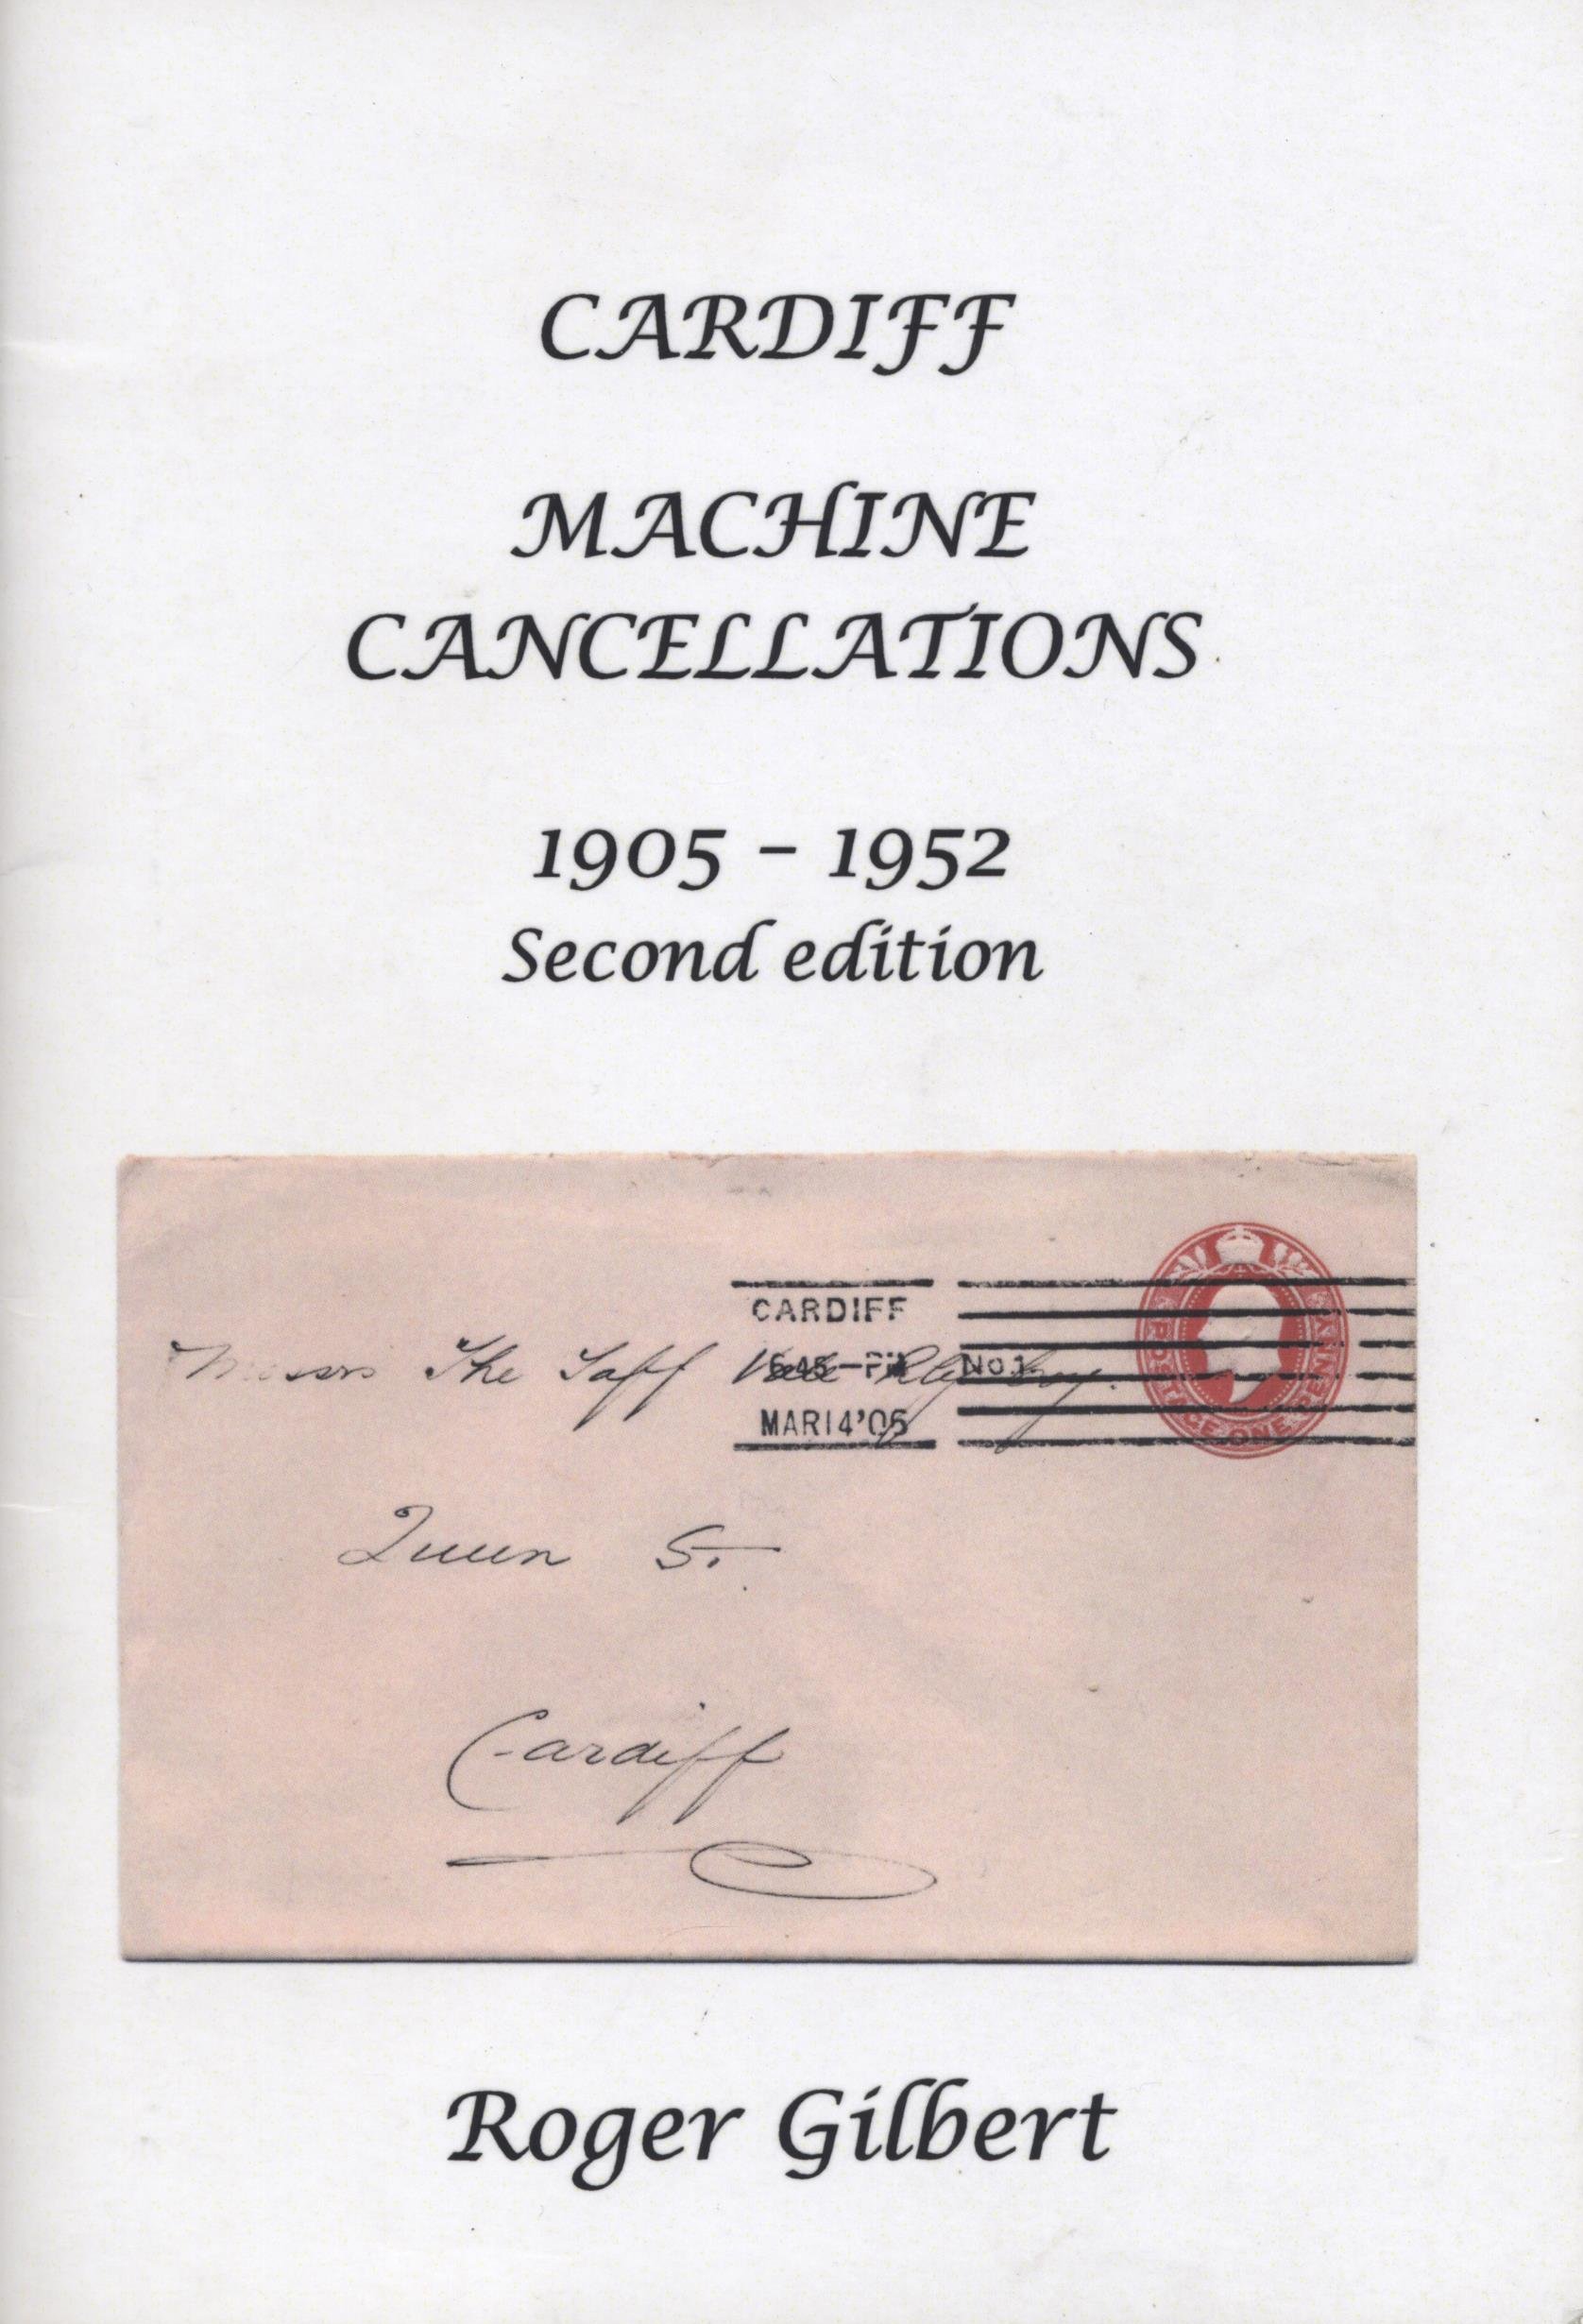 CARDIFF MACHINE CANCELLATIONS 1905 - 1952Click here to see sample pages